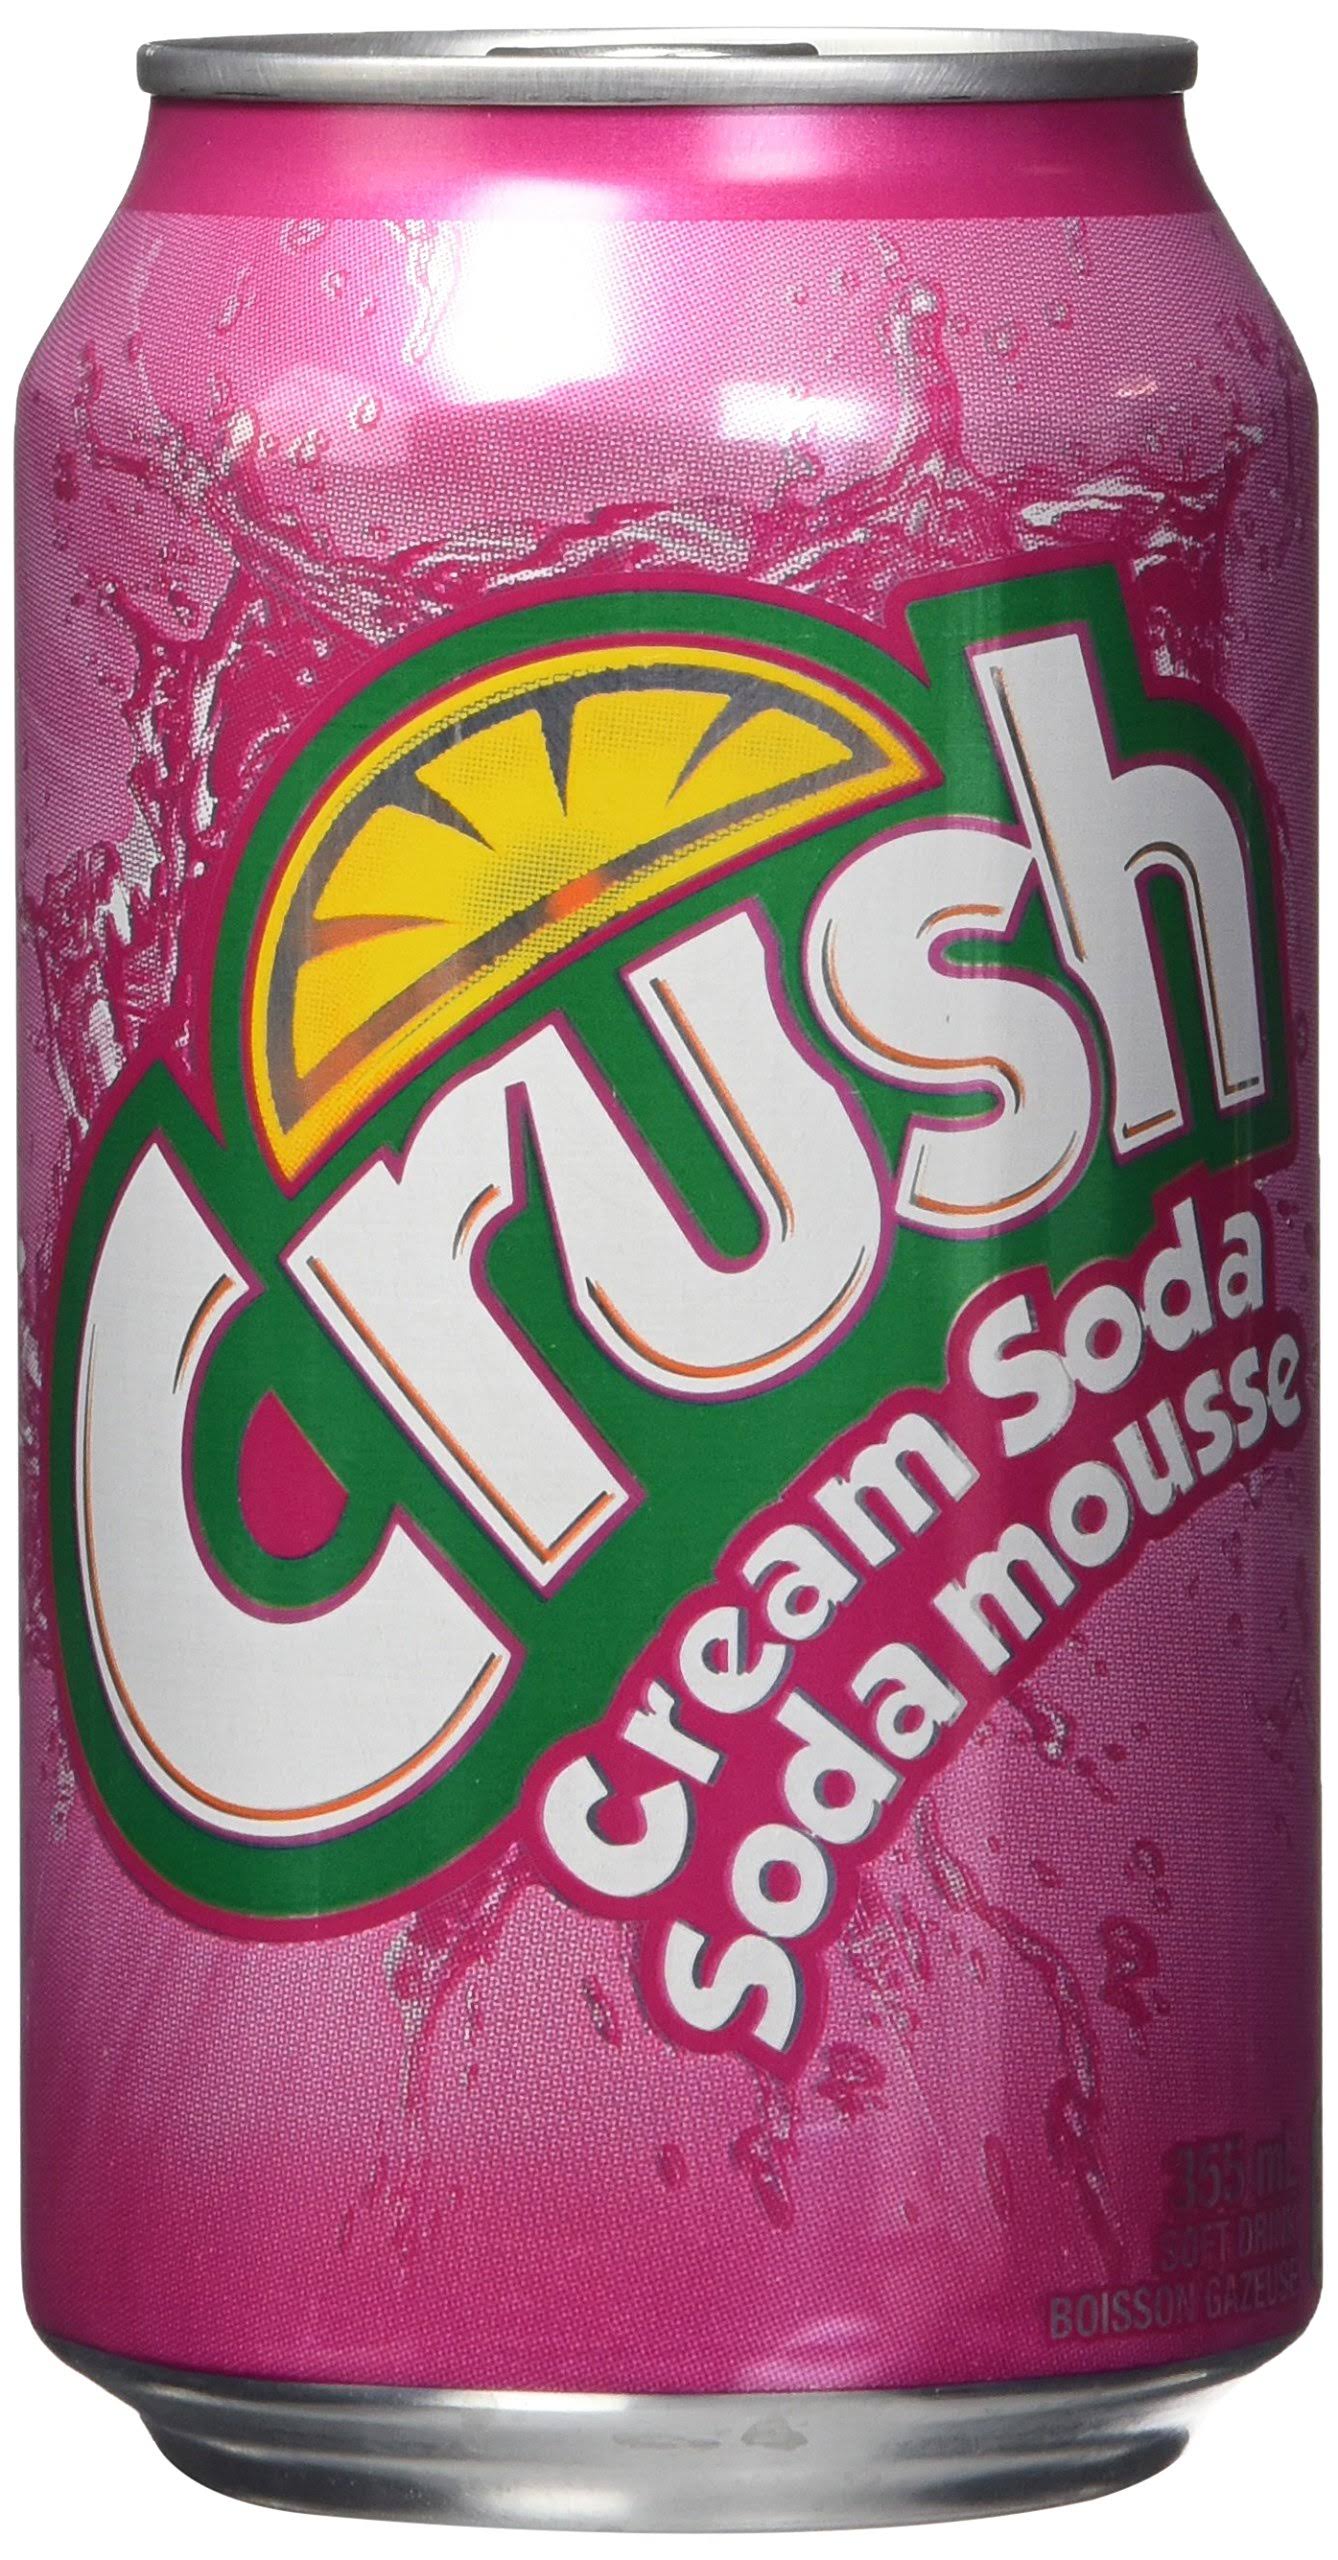 Crush Cream Soda Carbonated Soft Drink - 12 Cans, 7092ml